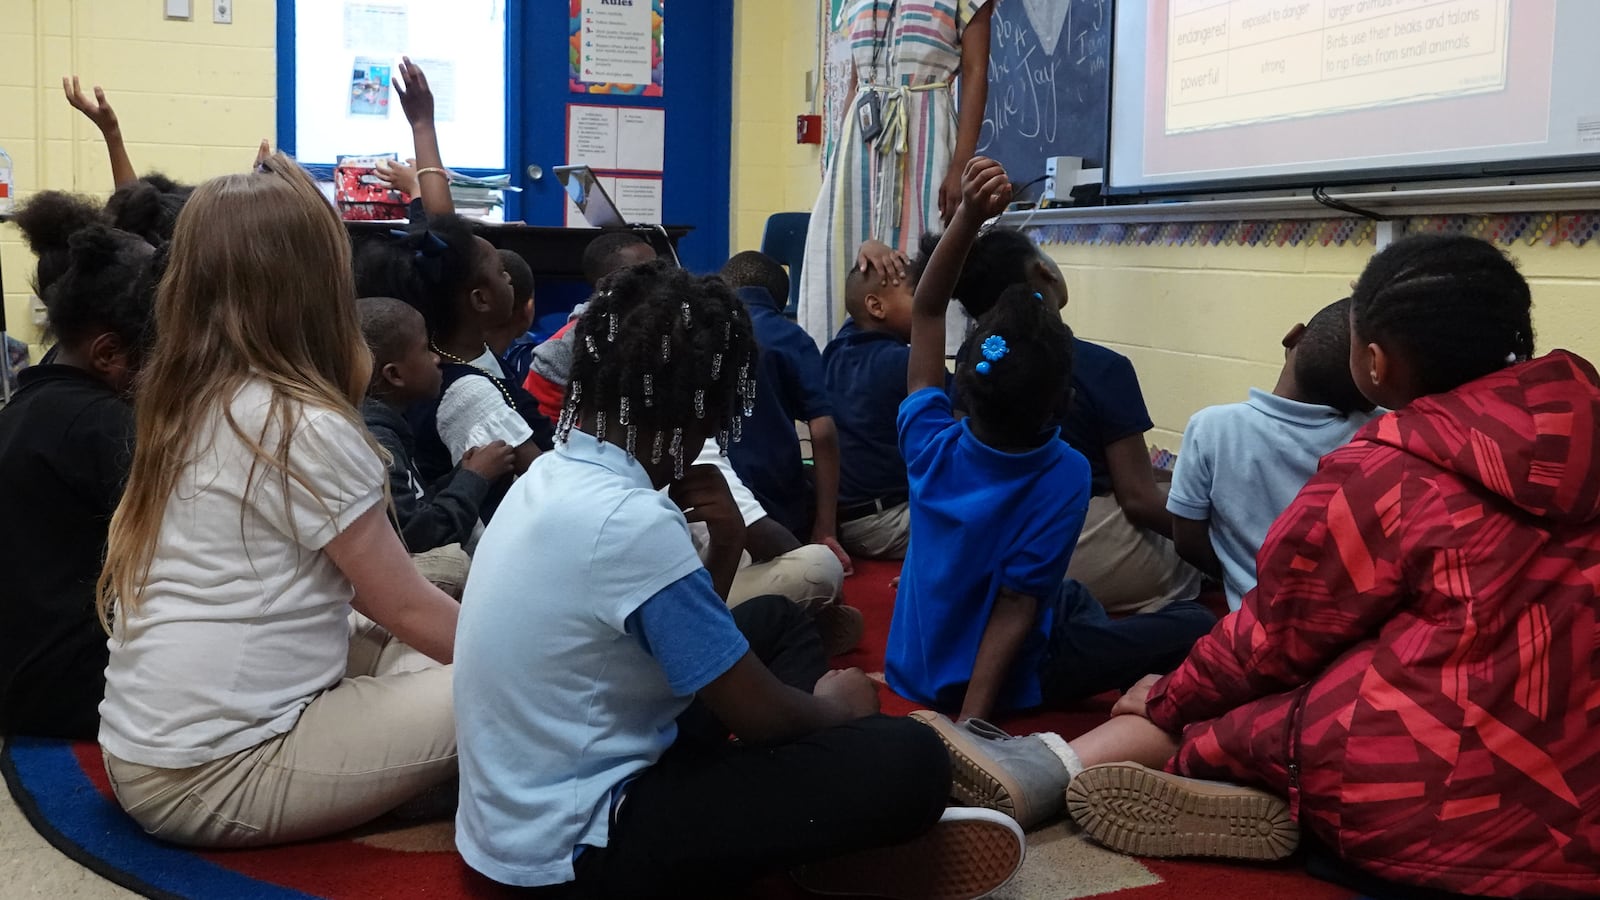 Students raise their hands in a classroom at Gardenview Elementary School in Memphis in this file photo from May 2019.